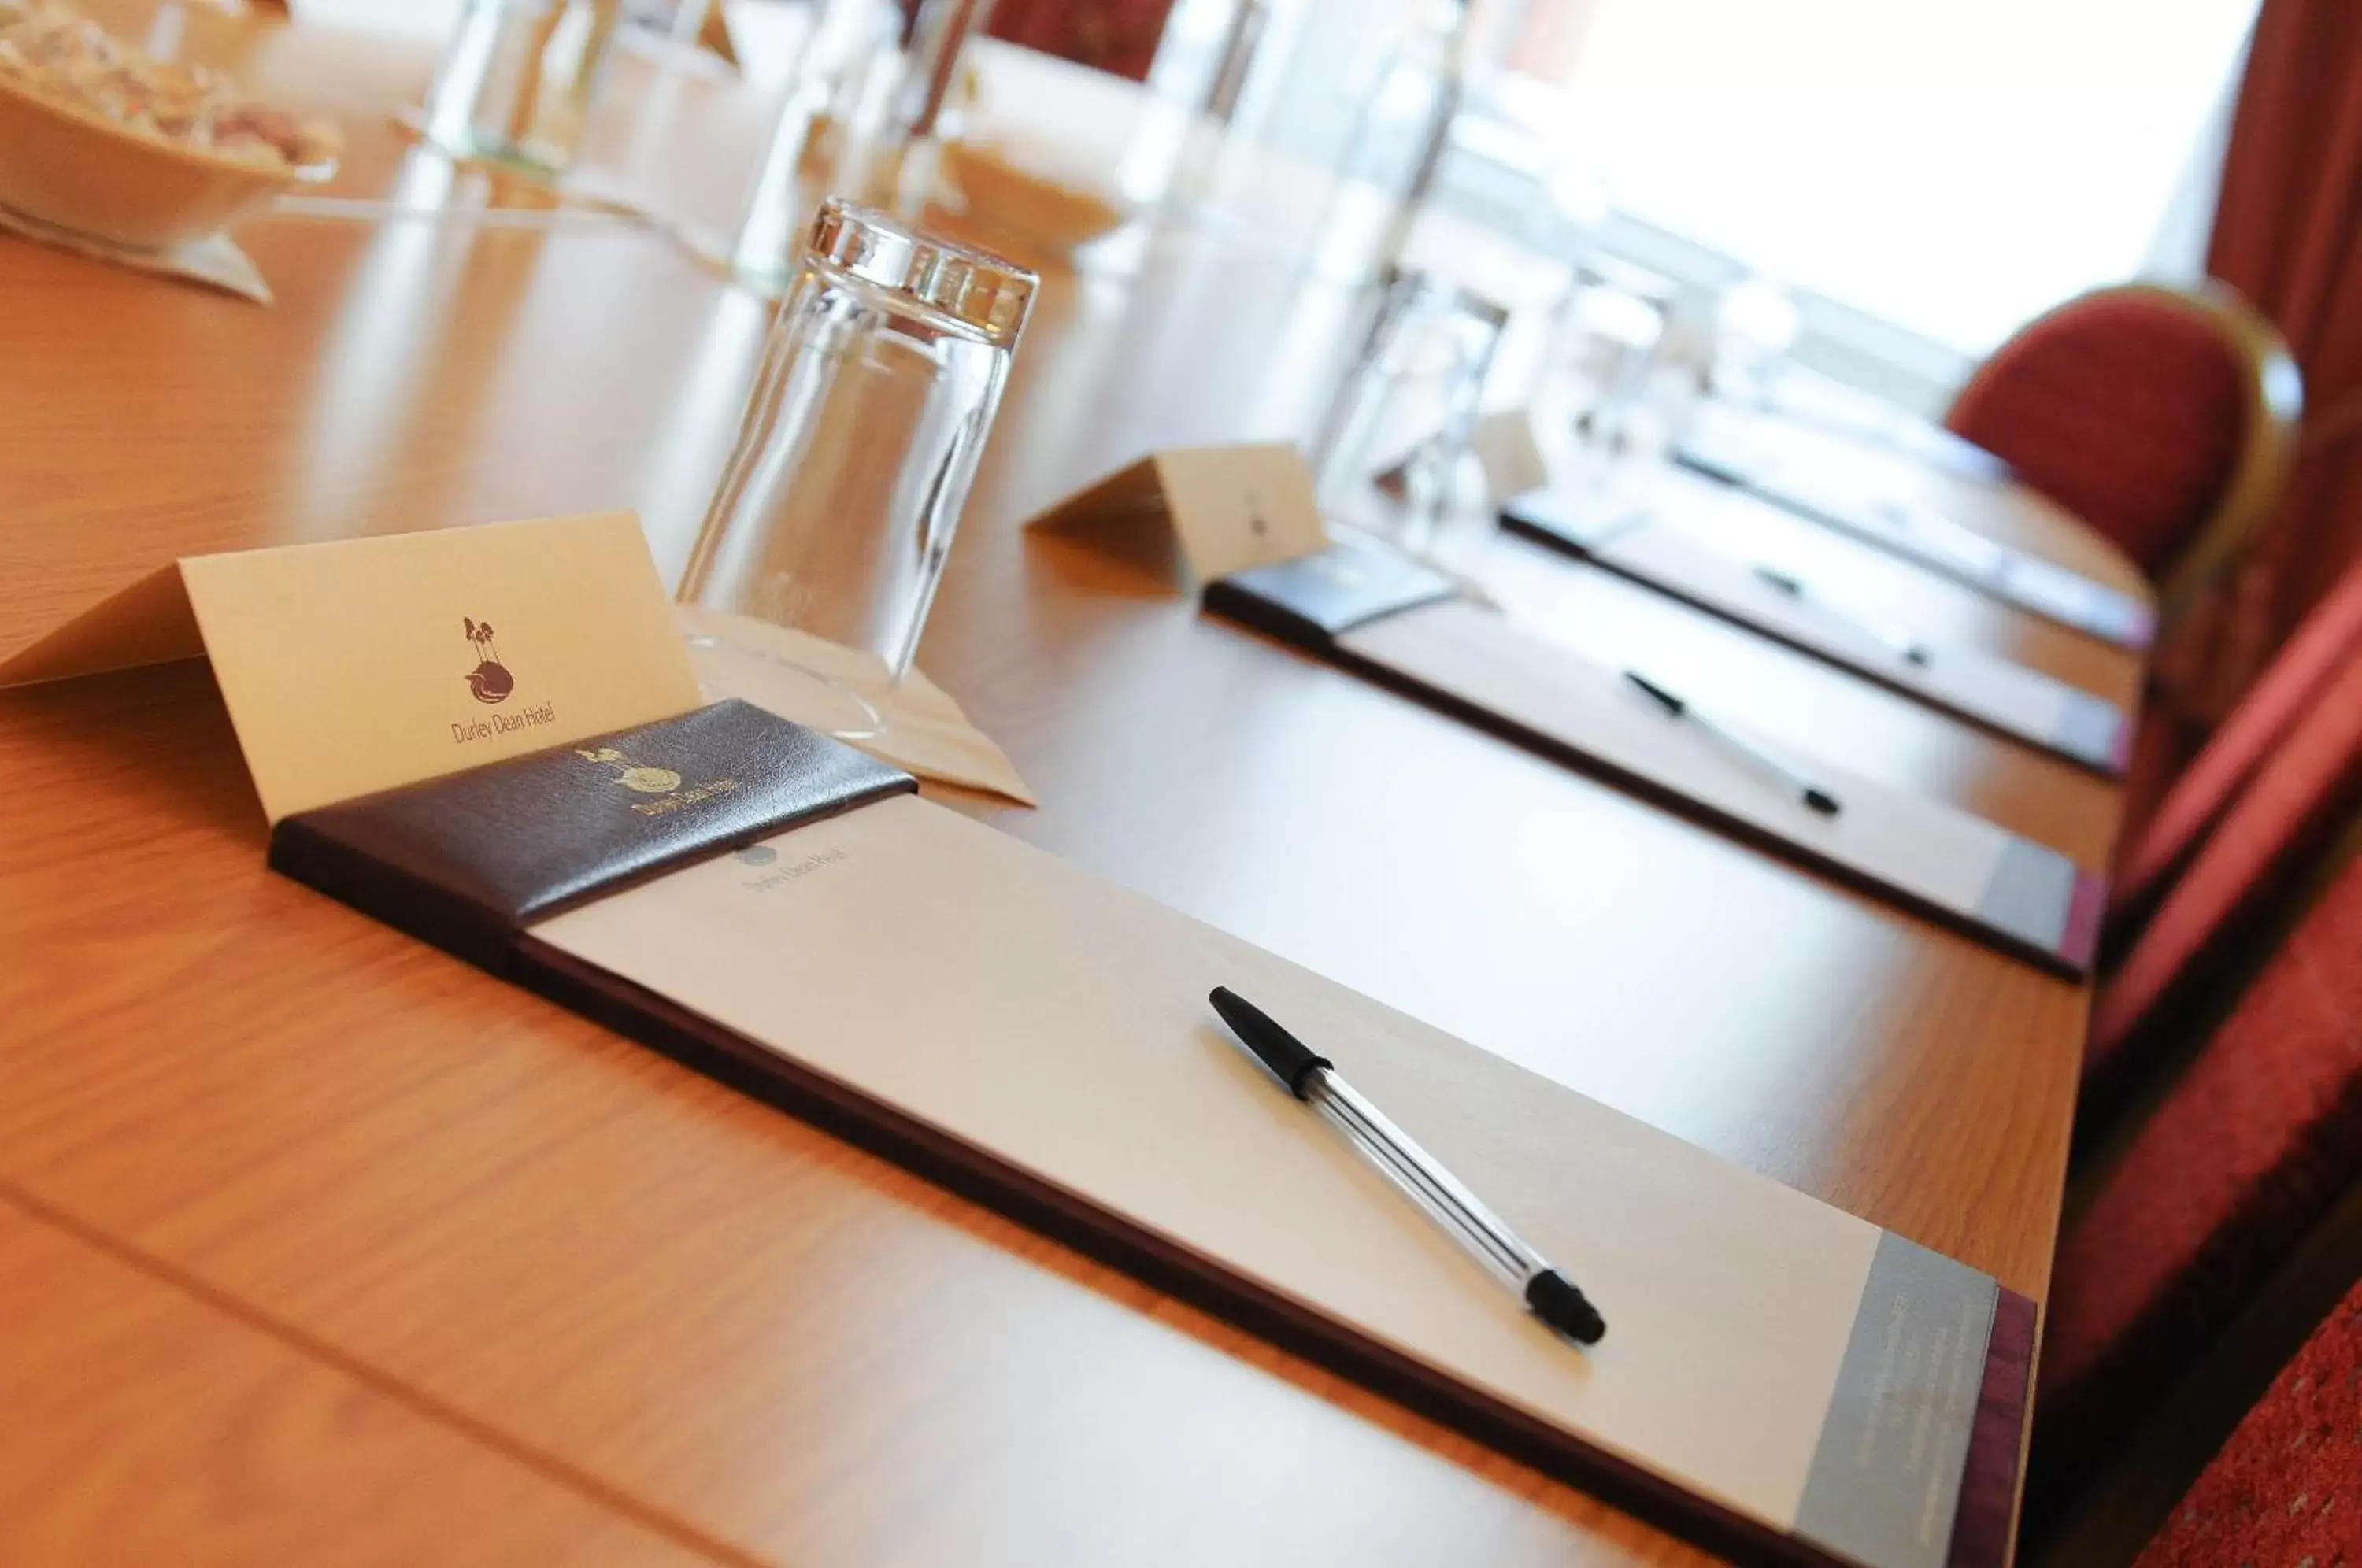 Business facilities in Durley Dean